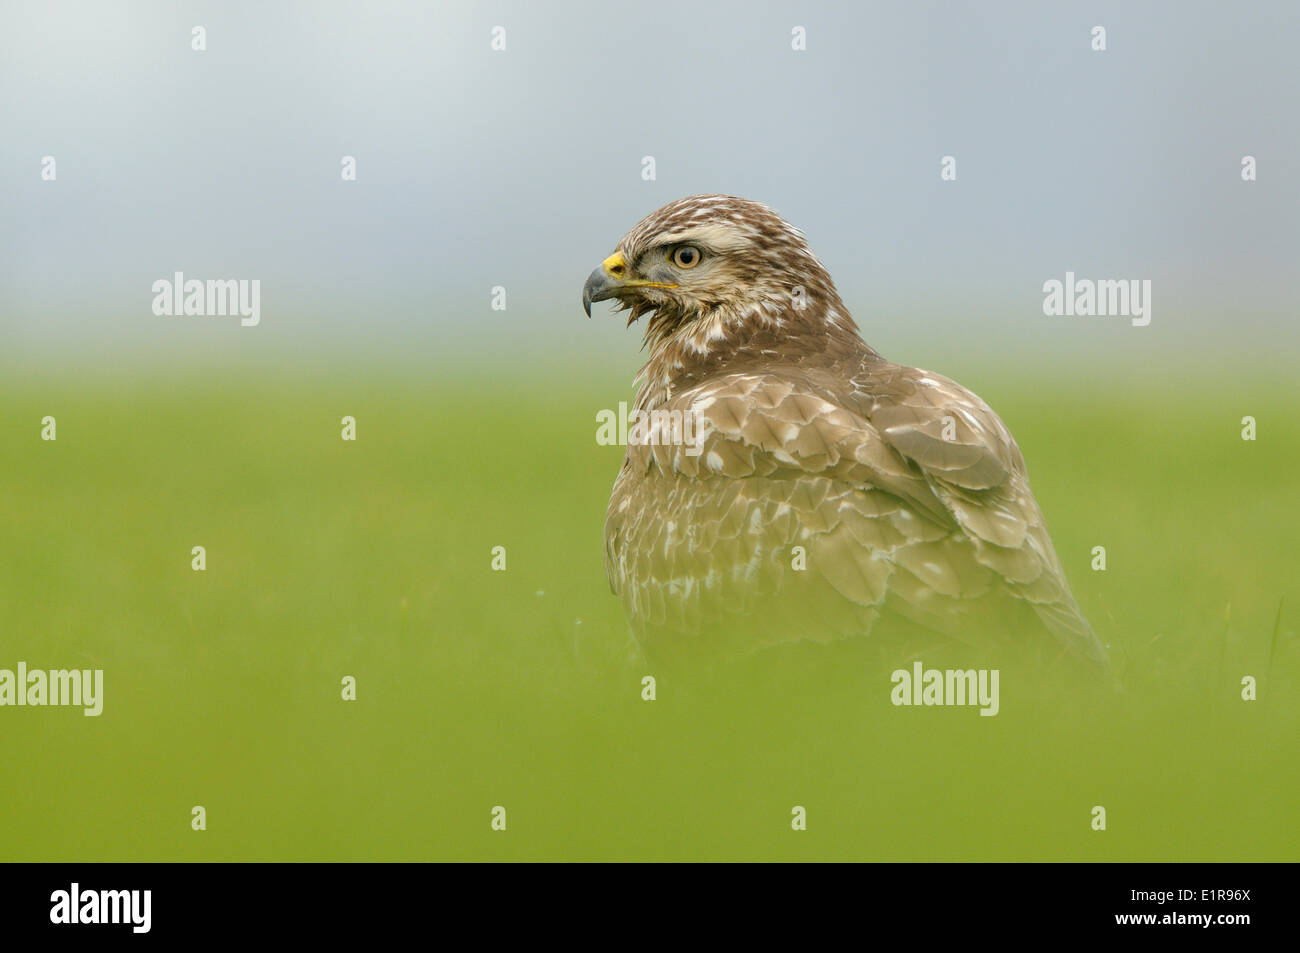 Headshot of a Buzzard feeding on earthworms on a meadow. Capture with low point of view Stock Photo